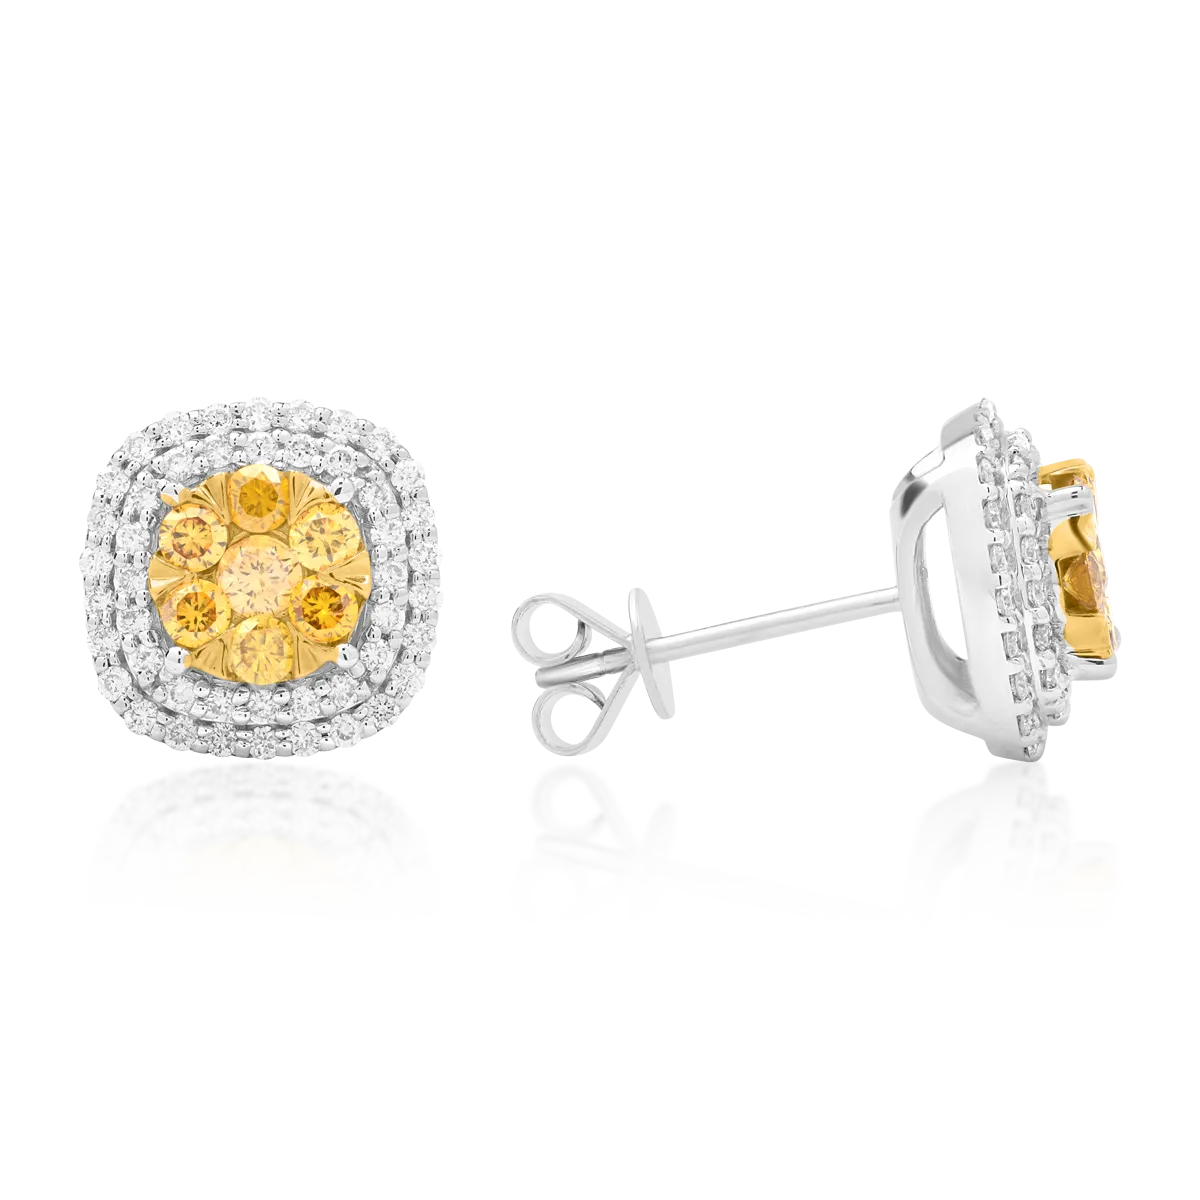 14K white gold earrings with 0.568ct fancy-yellow diamonds and 0.426ct diamonds